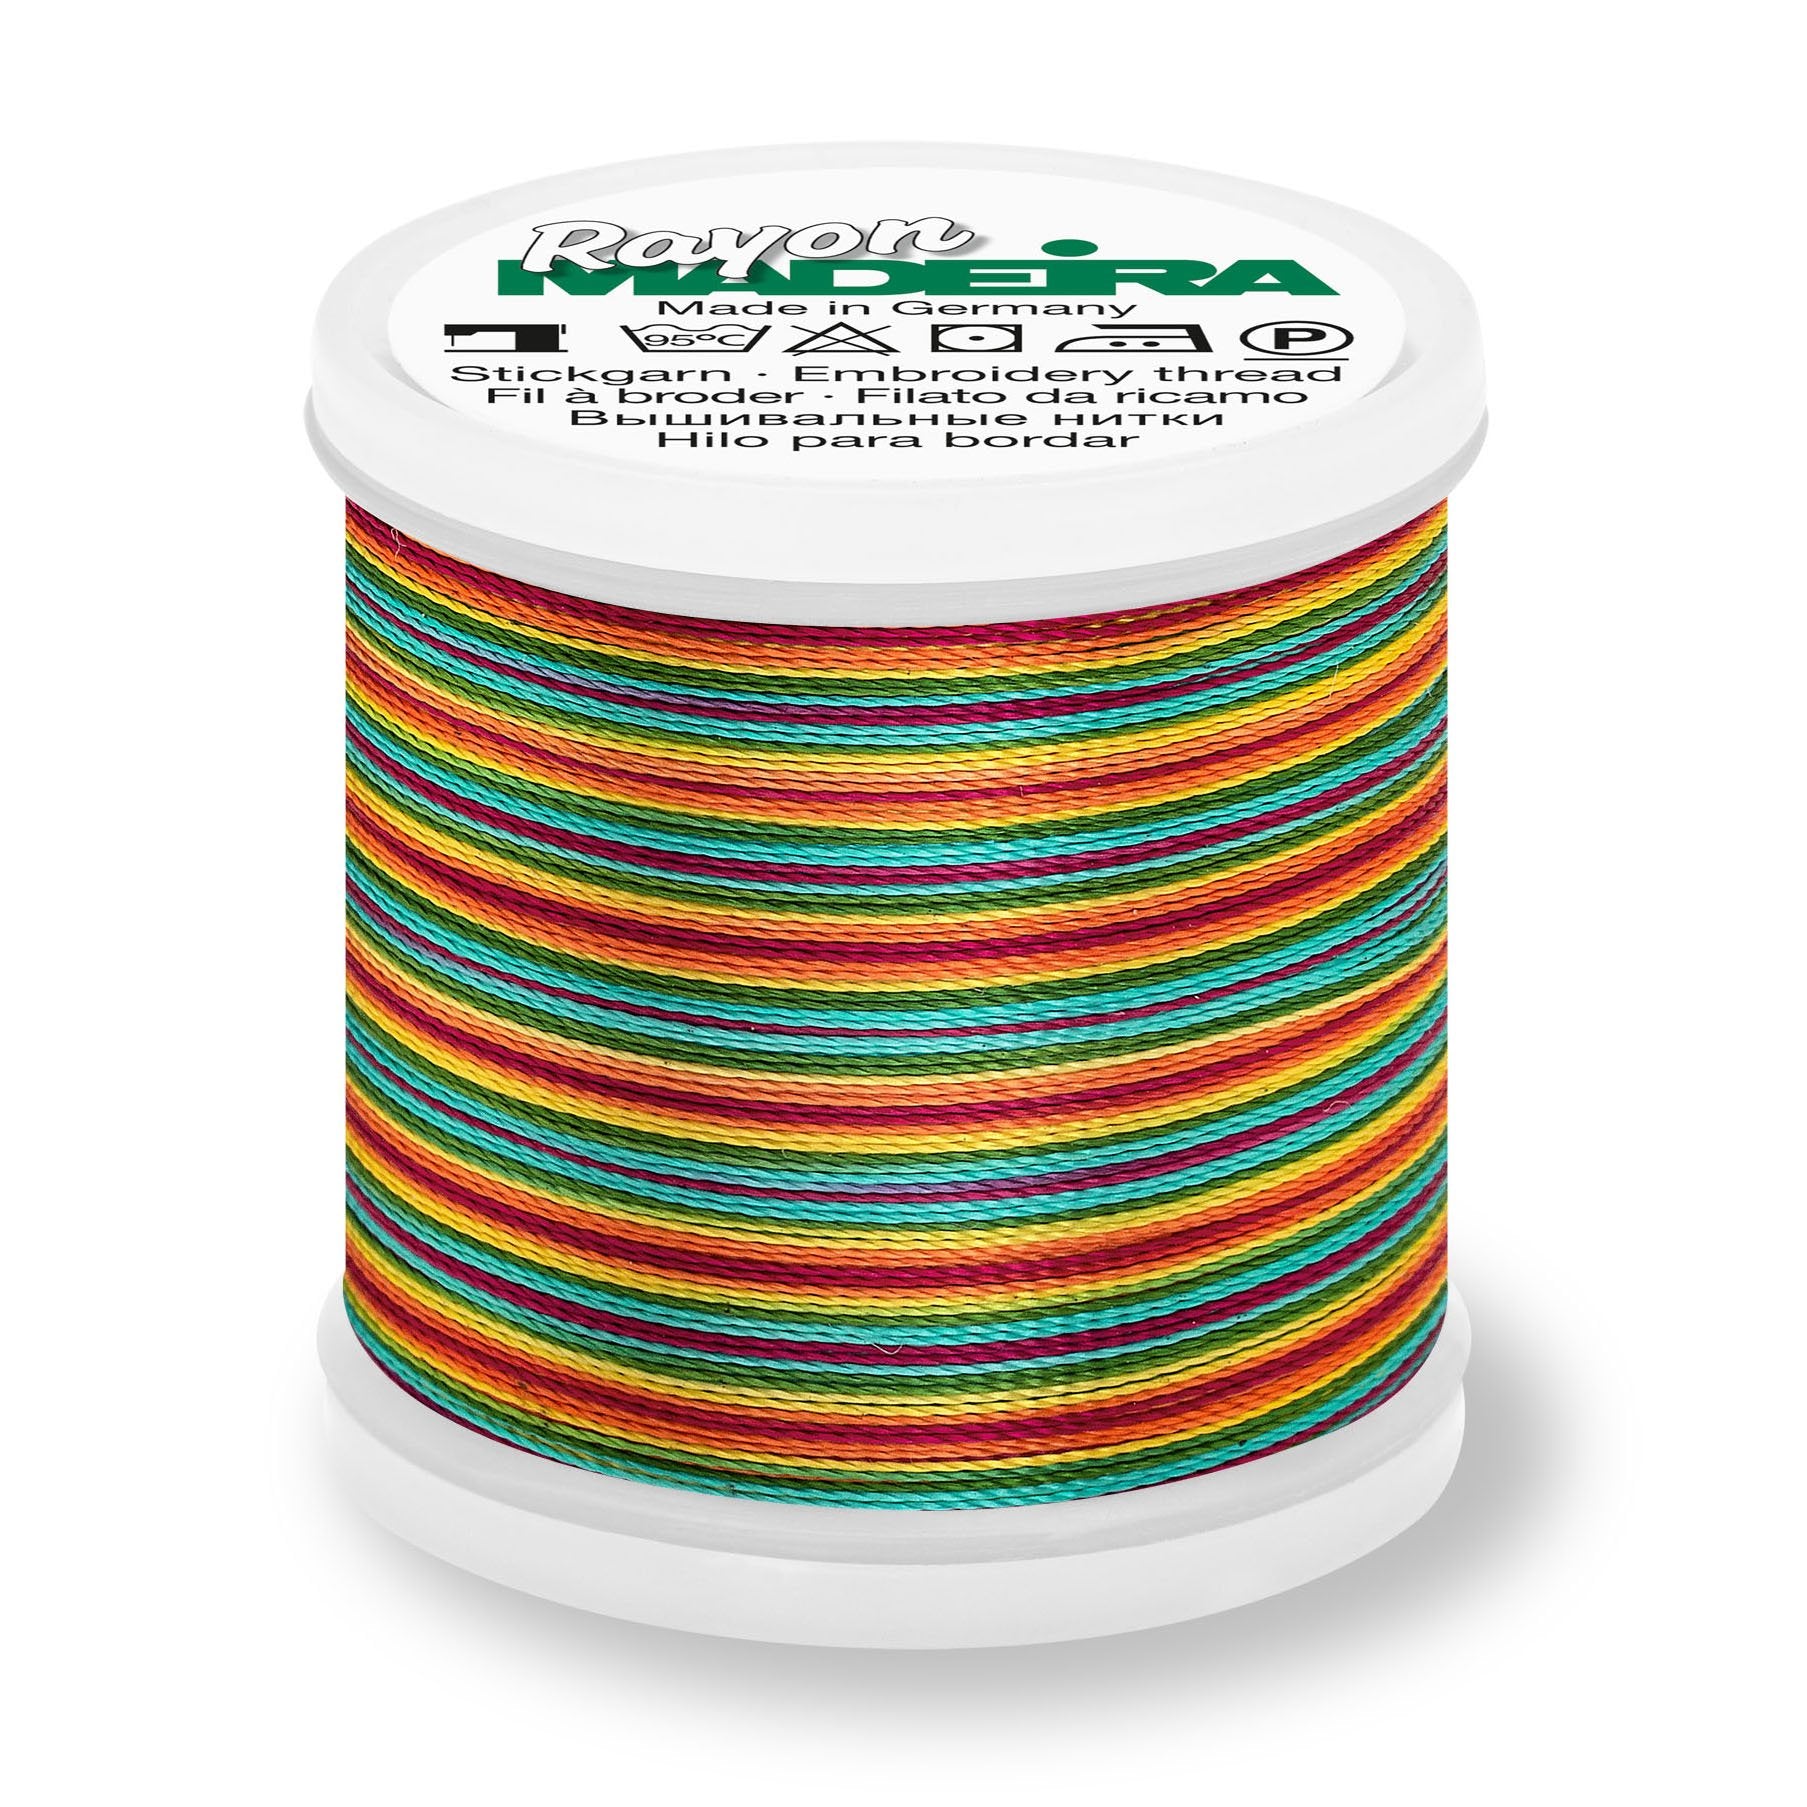 Madeira Rayon 40 Embroidery Thread 200m Multi #2147 Red/Yellow/Blue/Green from Jaycotts Sewing Supplies